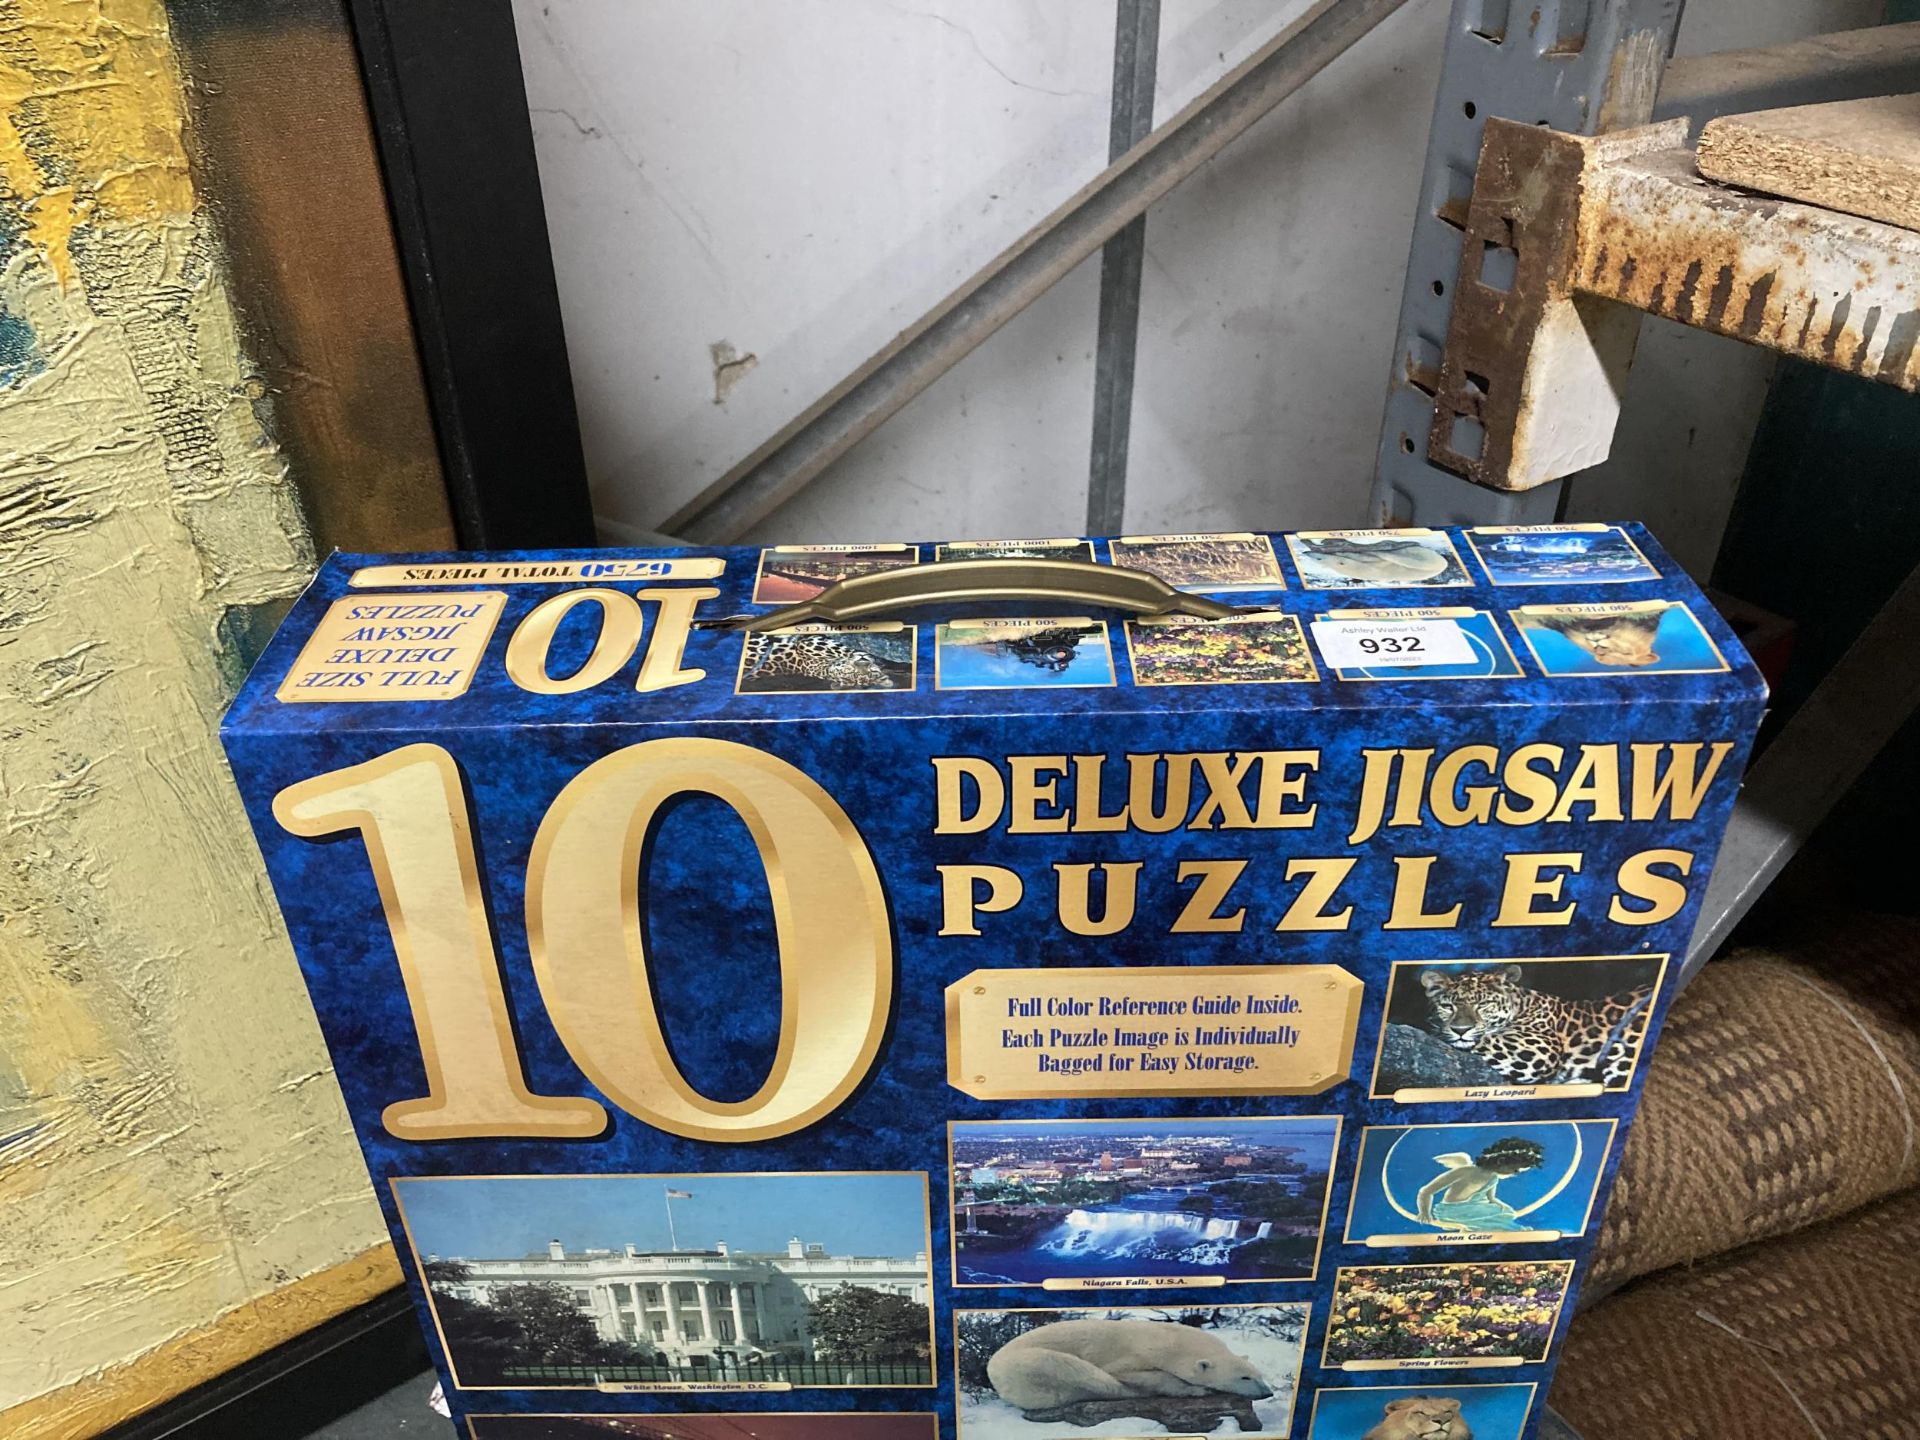 A BOXED 10 DELUXE JIGSAW PUZZLES - AS NEW - Image 2 of 2